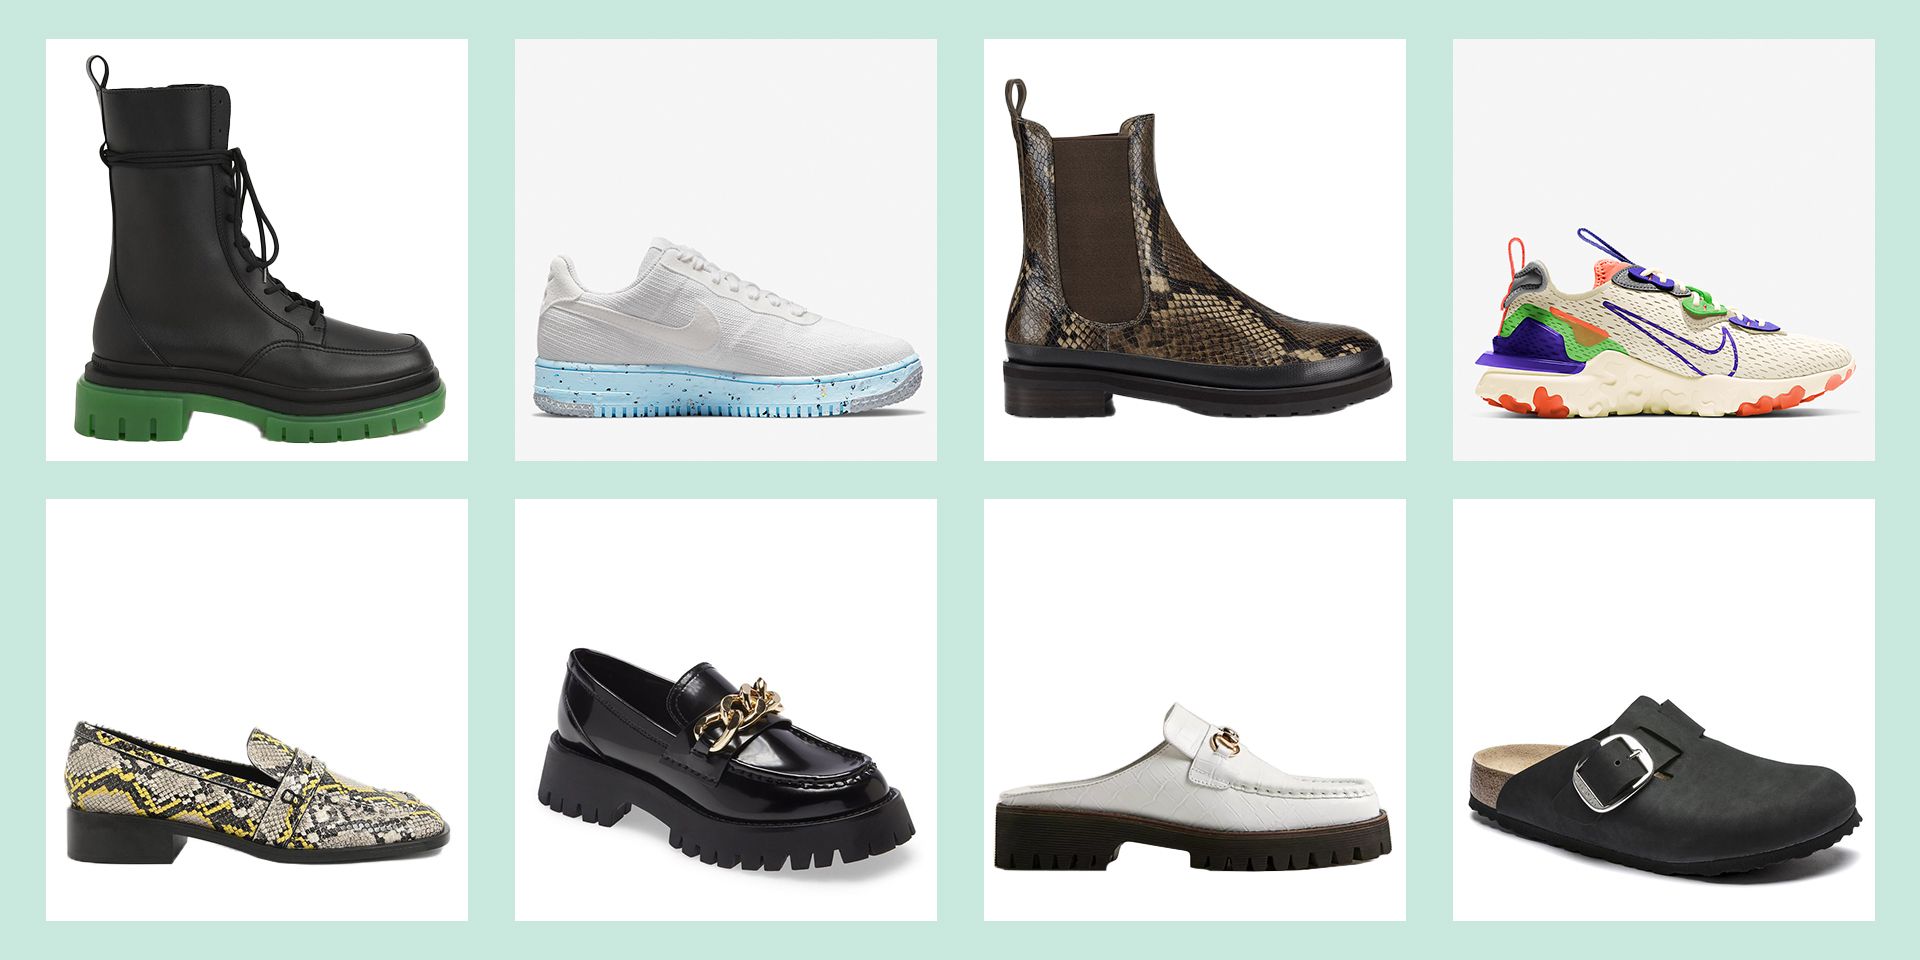 Buy > best shoes for autumn > in stock